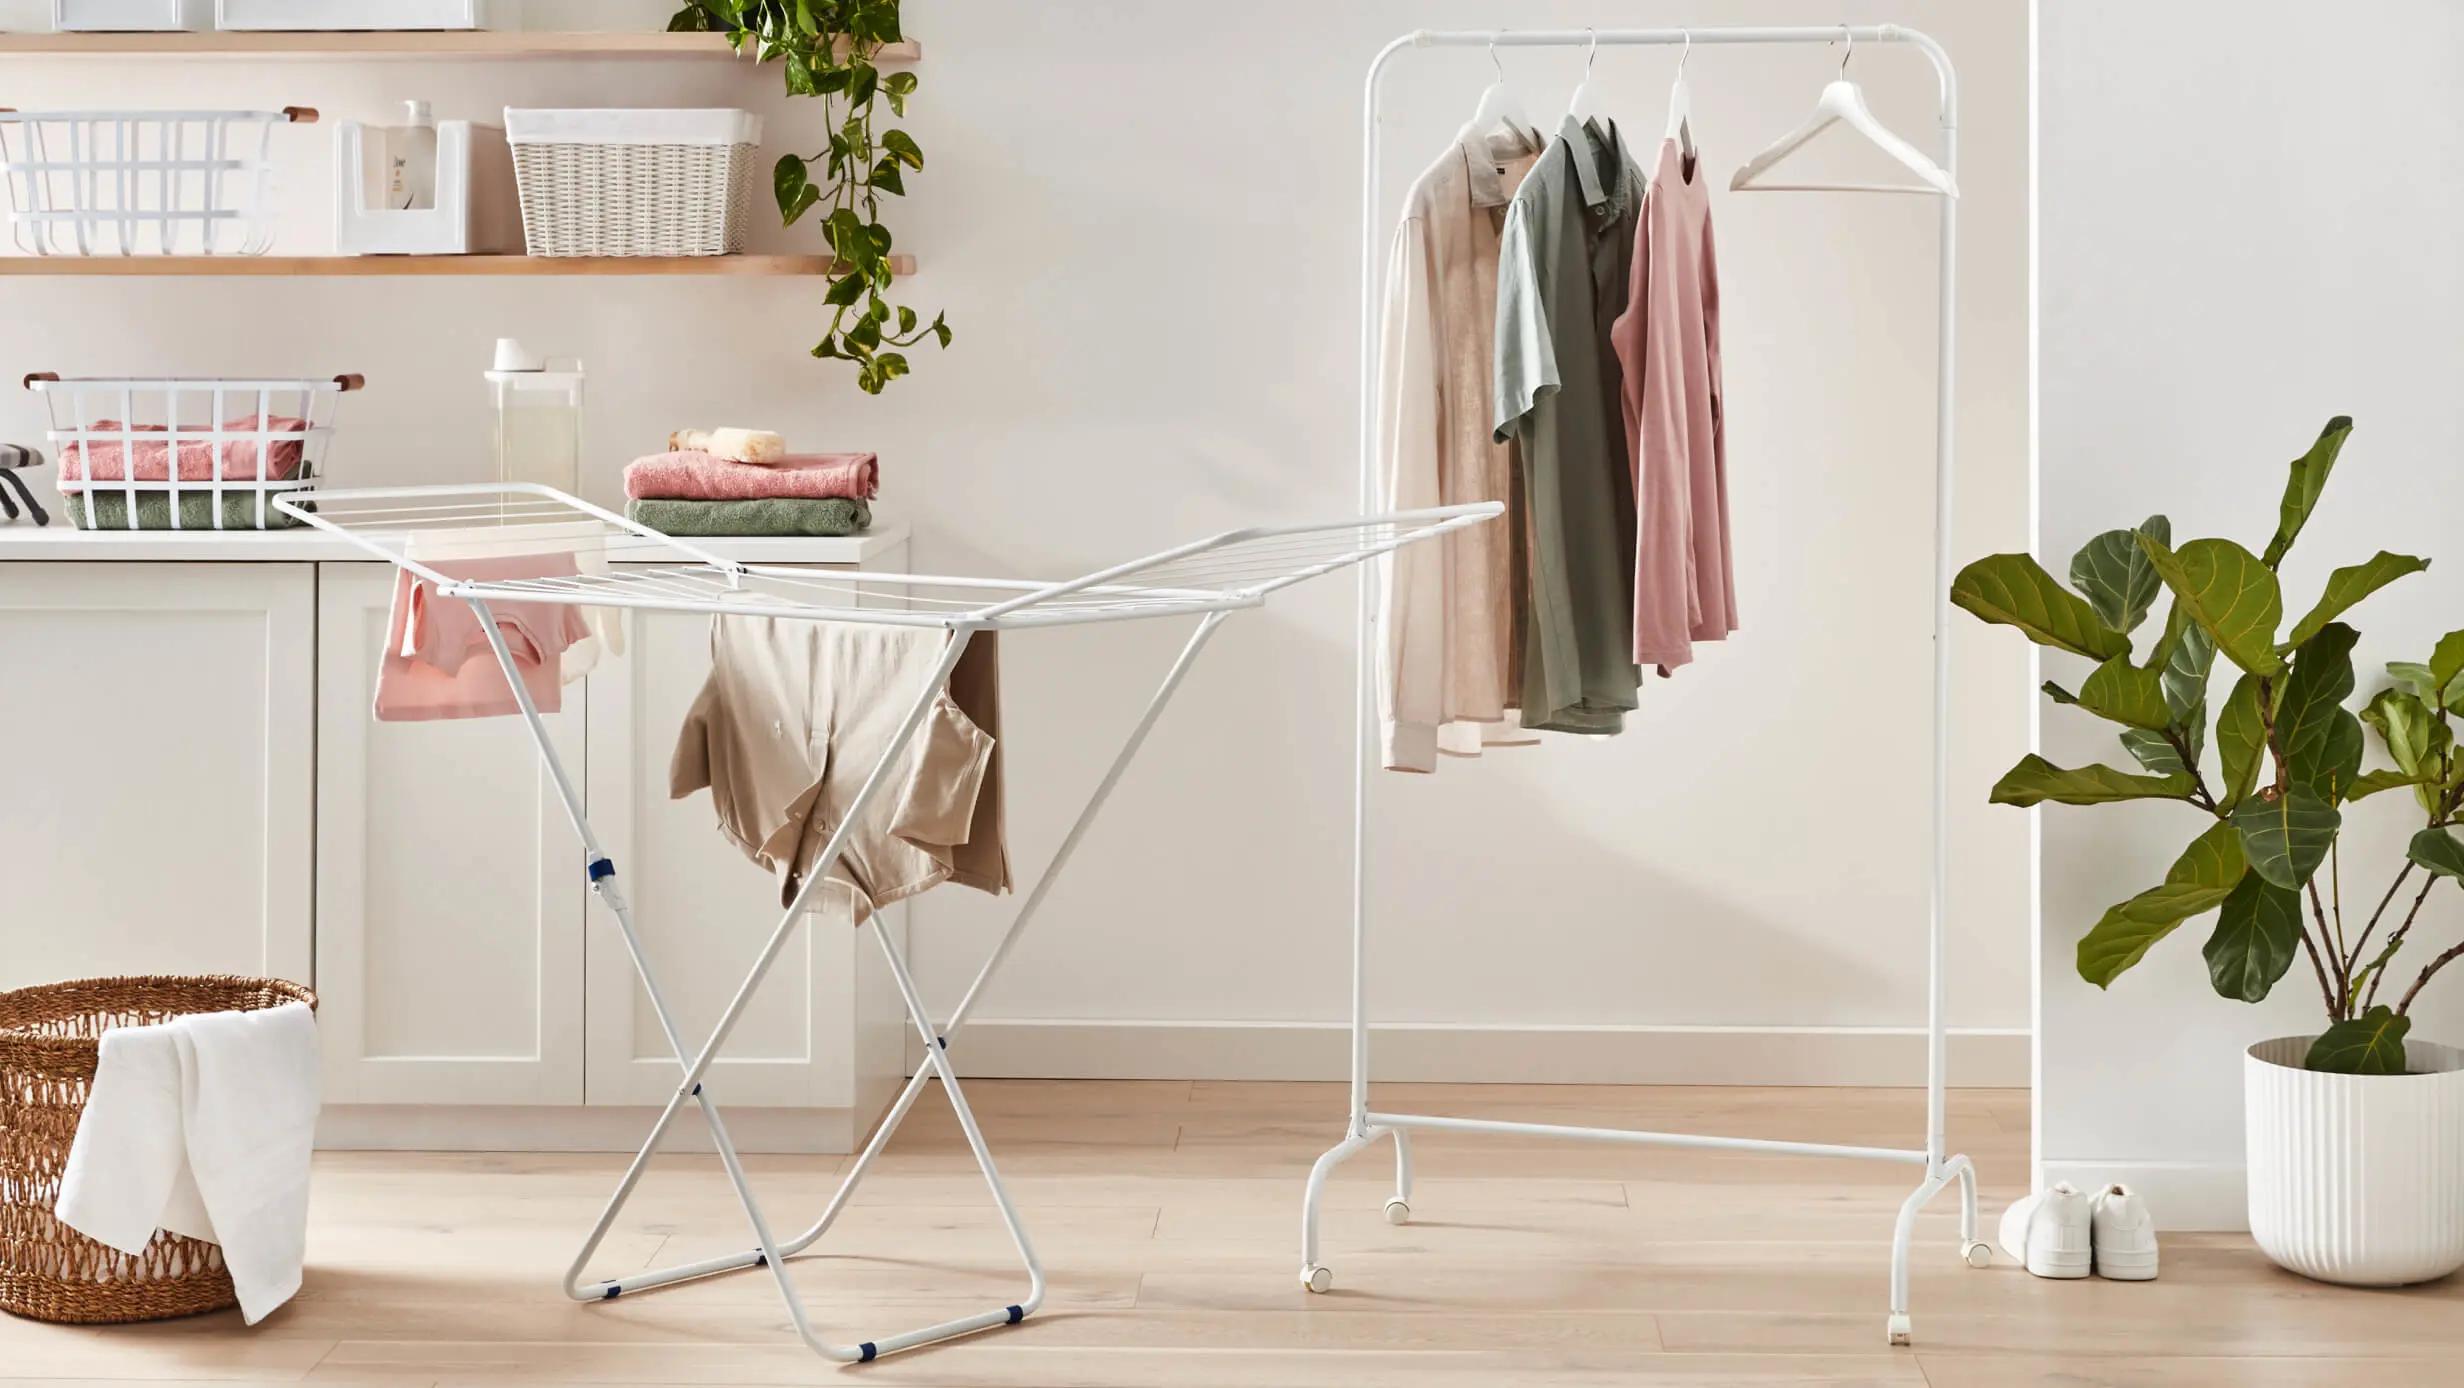 Laundry and Clothes Storage Racks